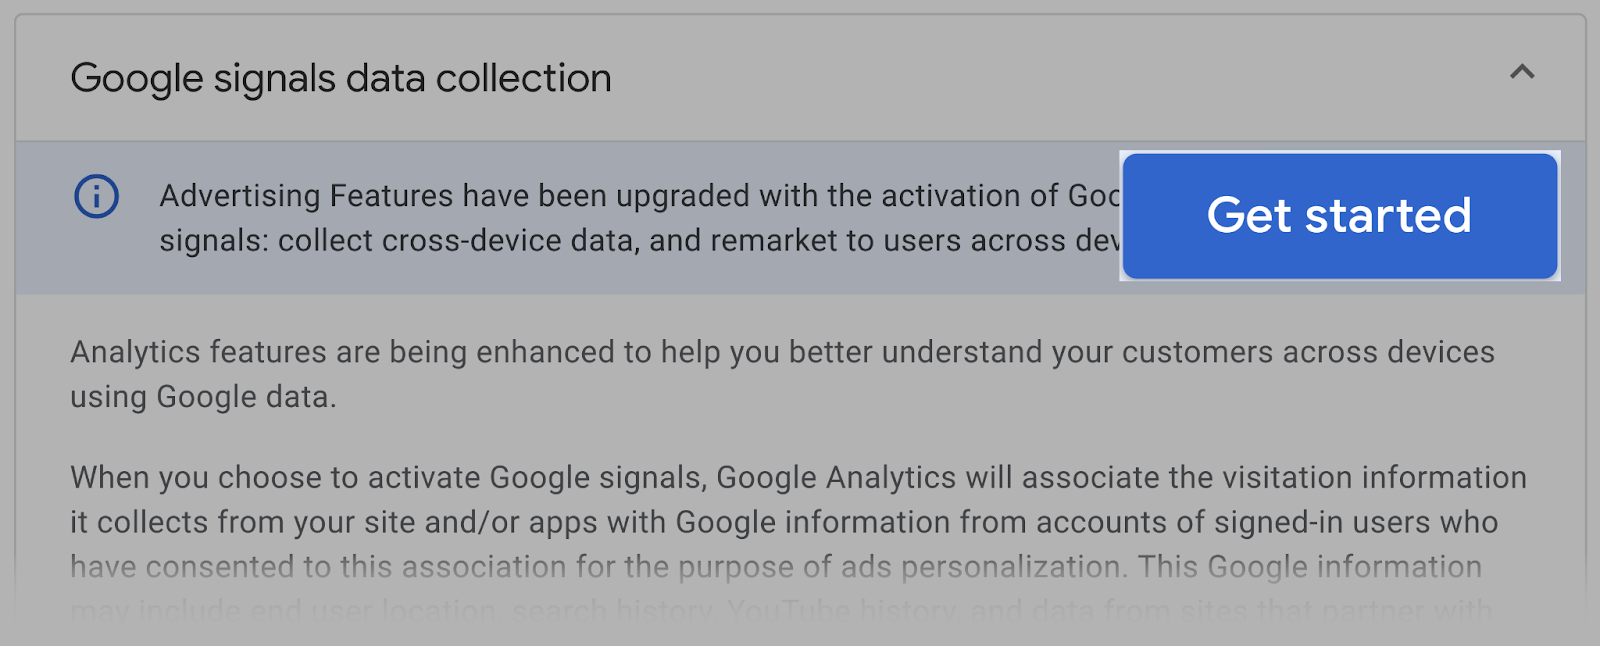 Get started with Google signals data collection